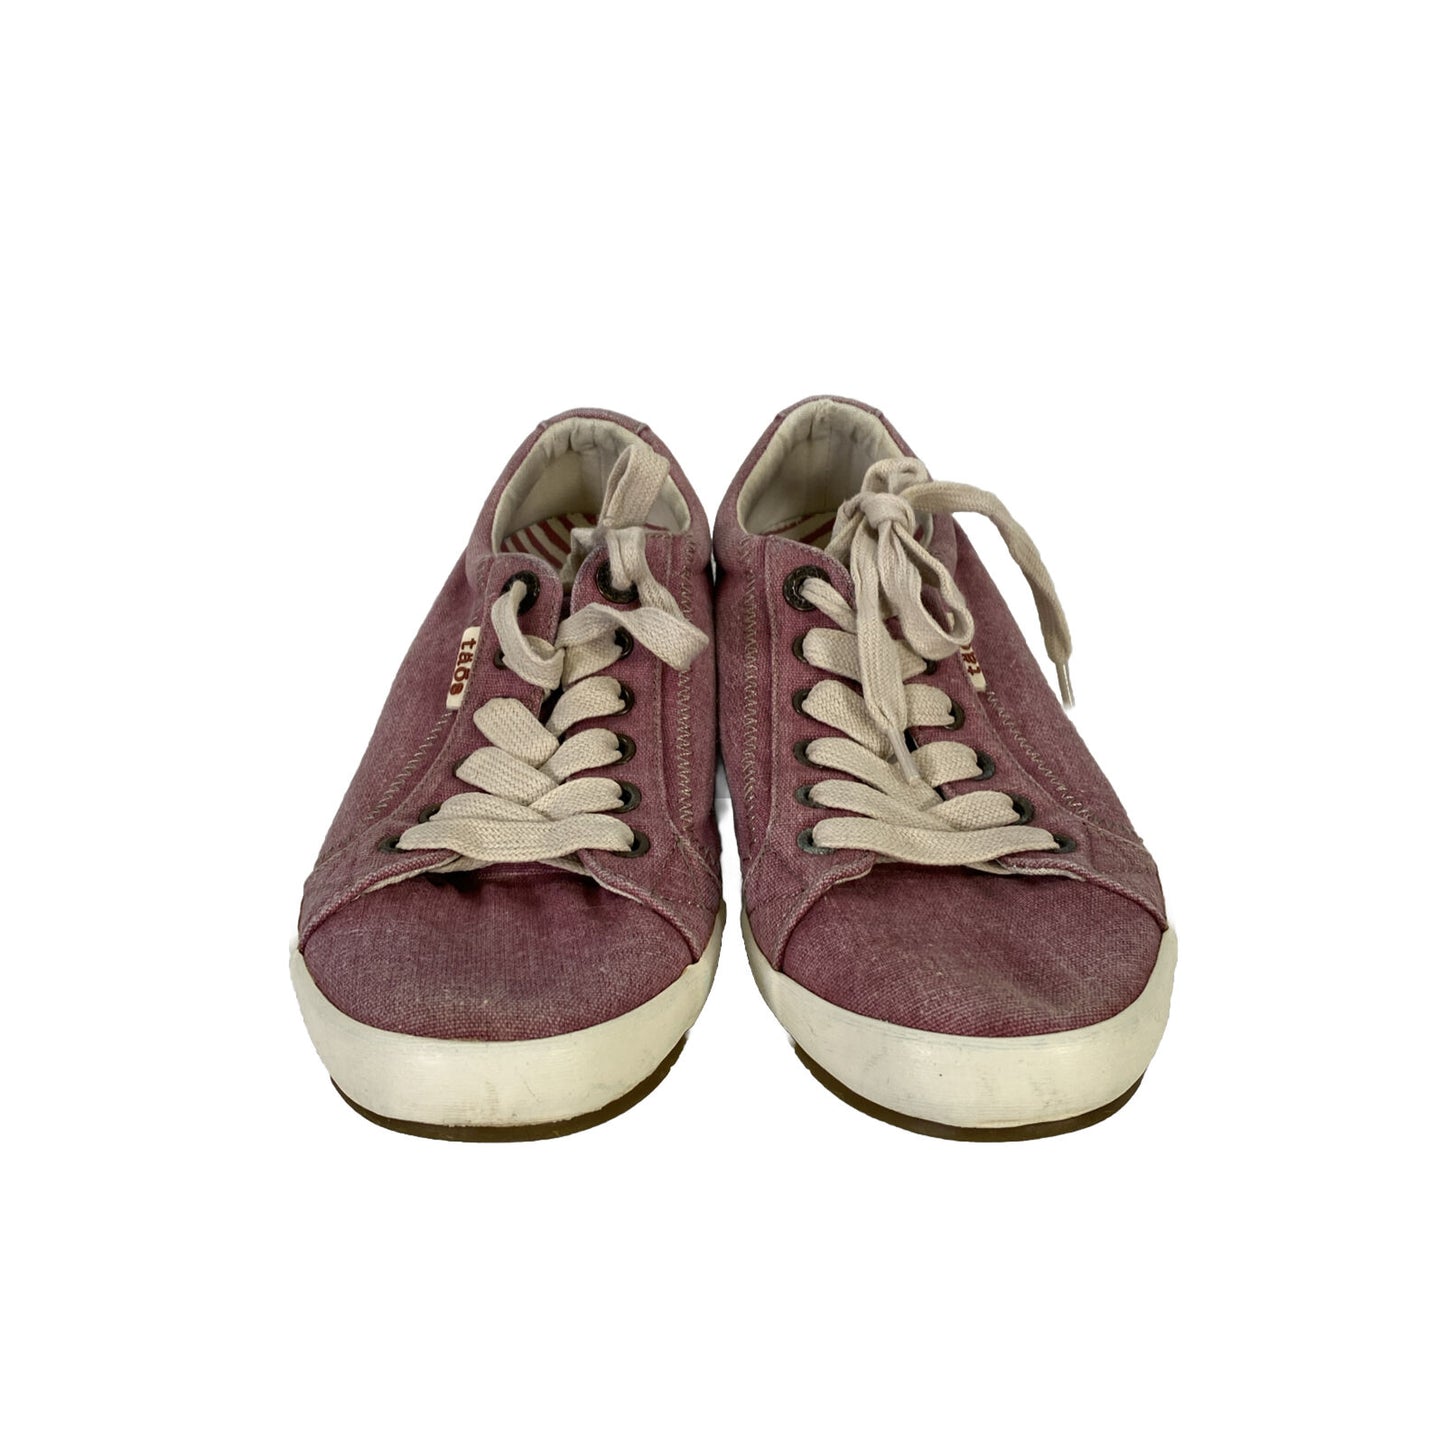 Taos Women's Purple Lace Up Casual Canvas Sneakers - 7.5